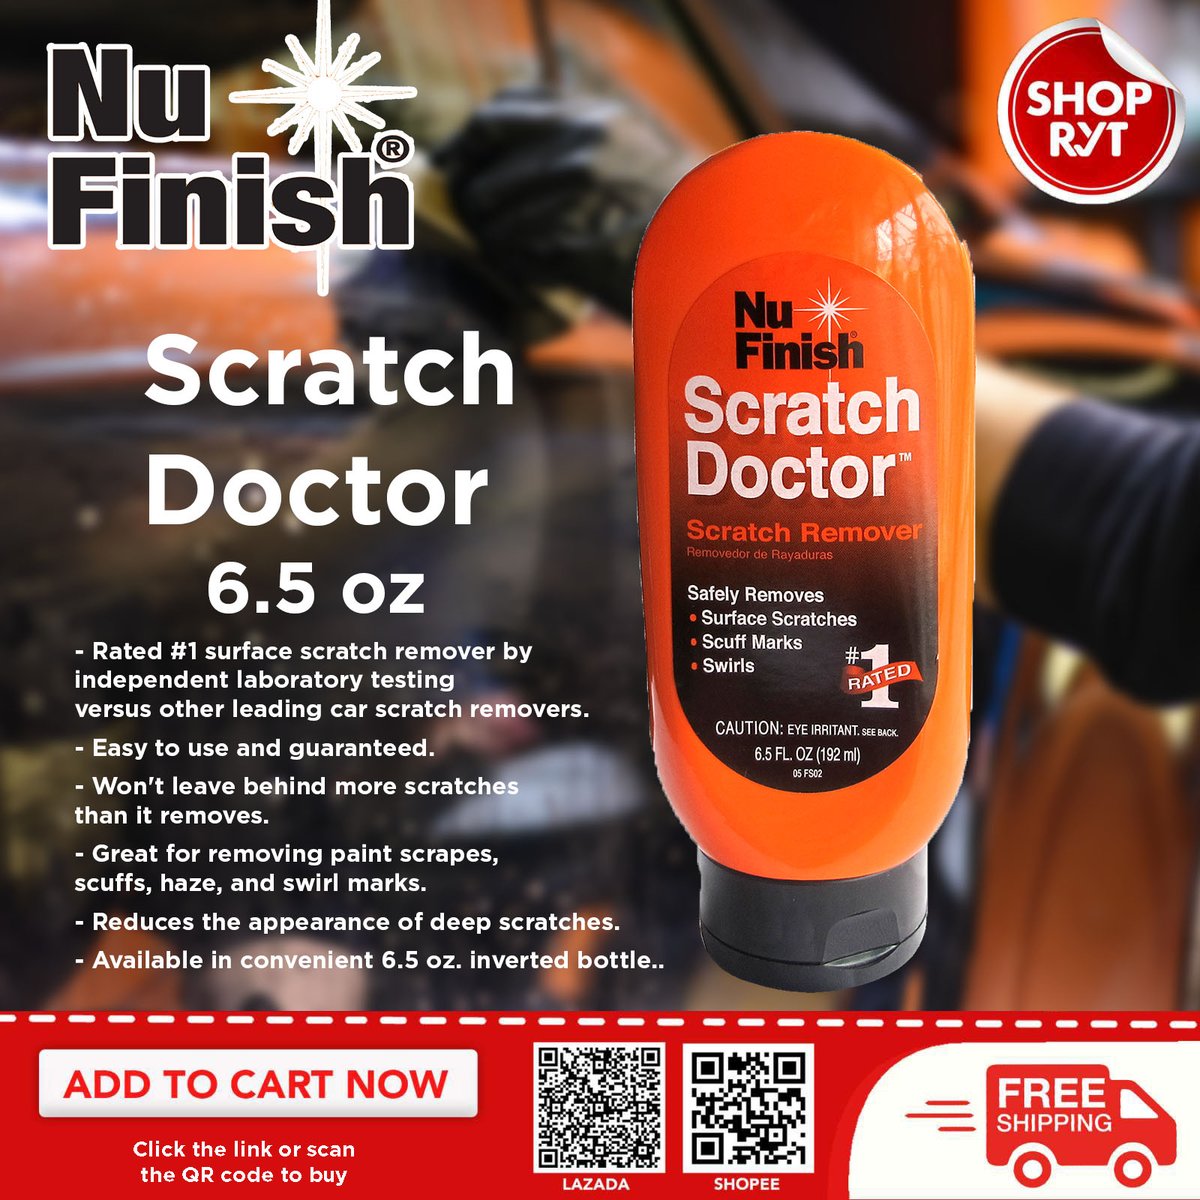 SHOPRYT OFFICIAL on X: Remove scratches on your automobiles with